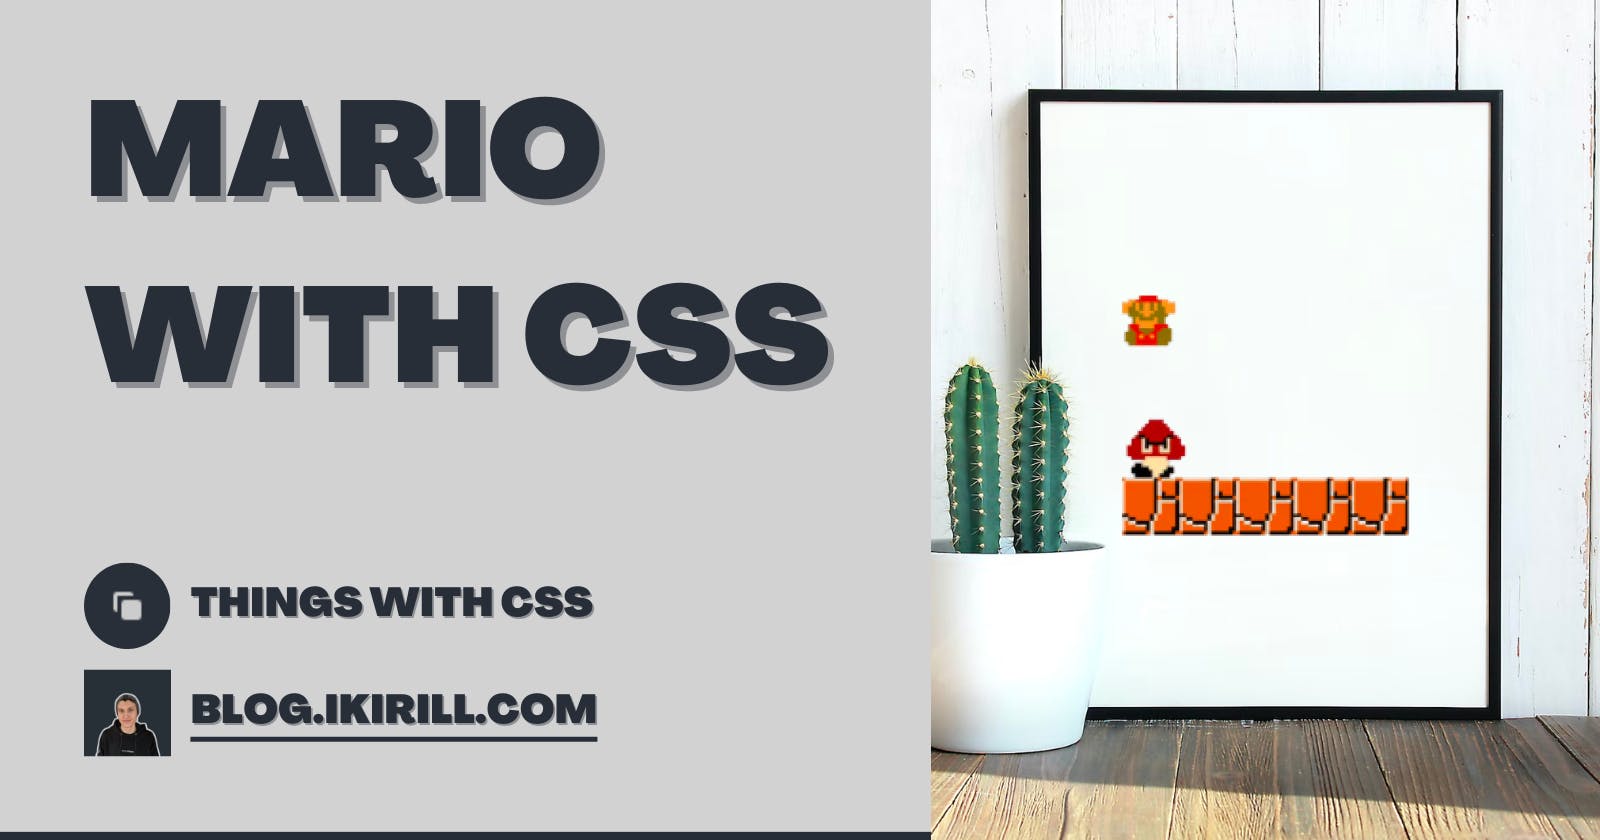 Mario with CSS